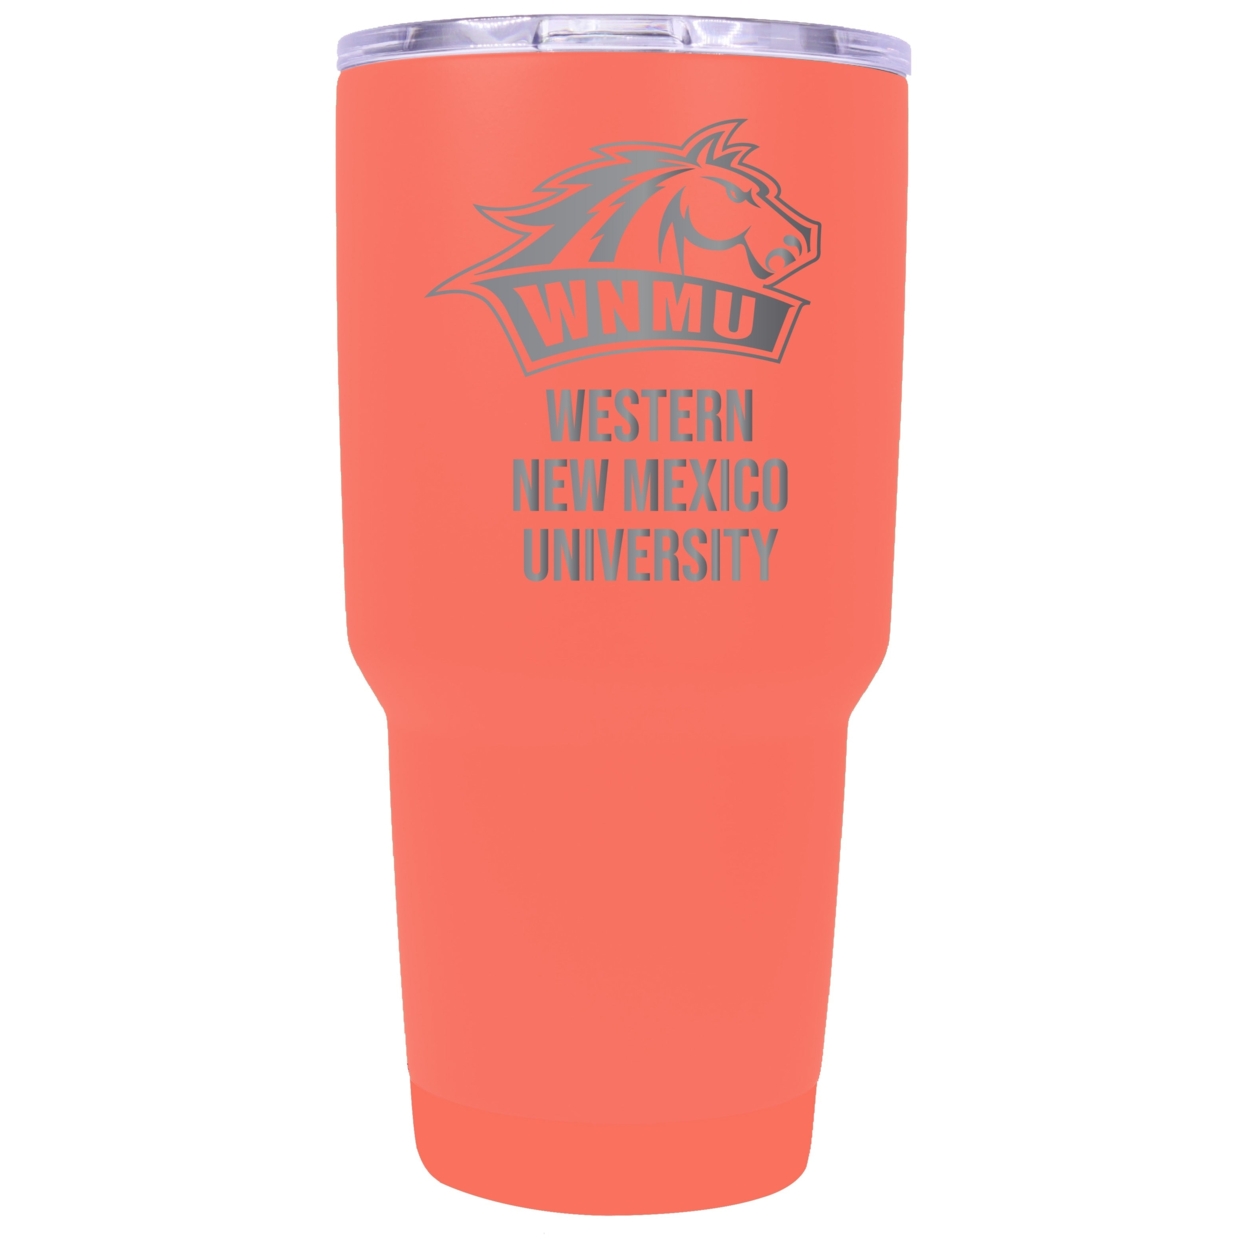 Western New Mexico University 24 Oz Laser Engraved Stainless Steel Insulated Tumbler - Choose Your Color. - Coral